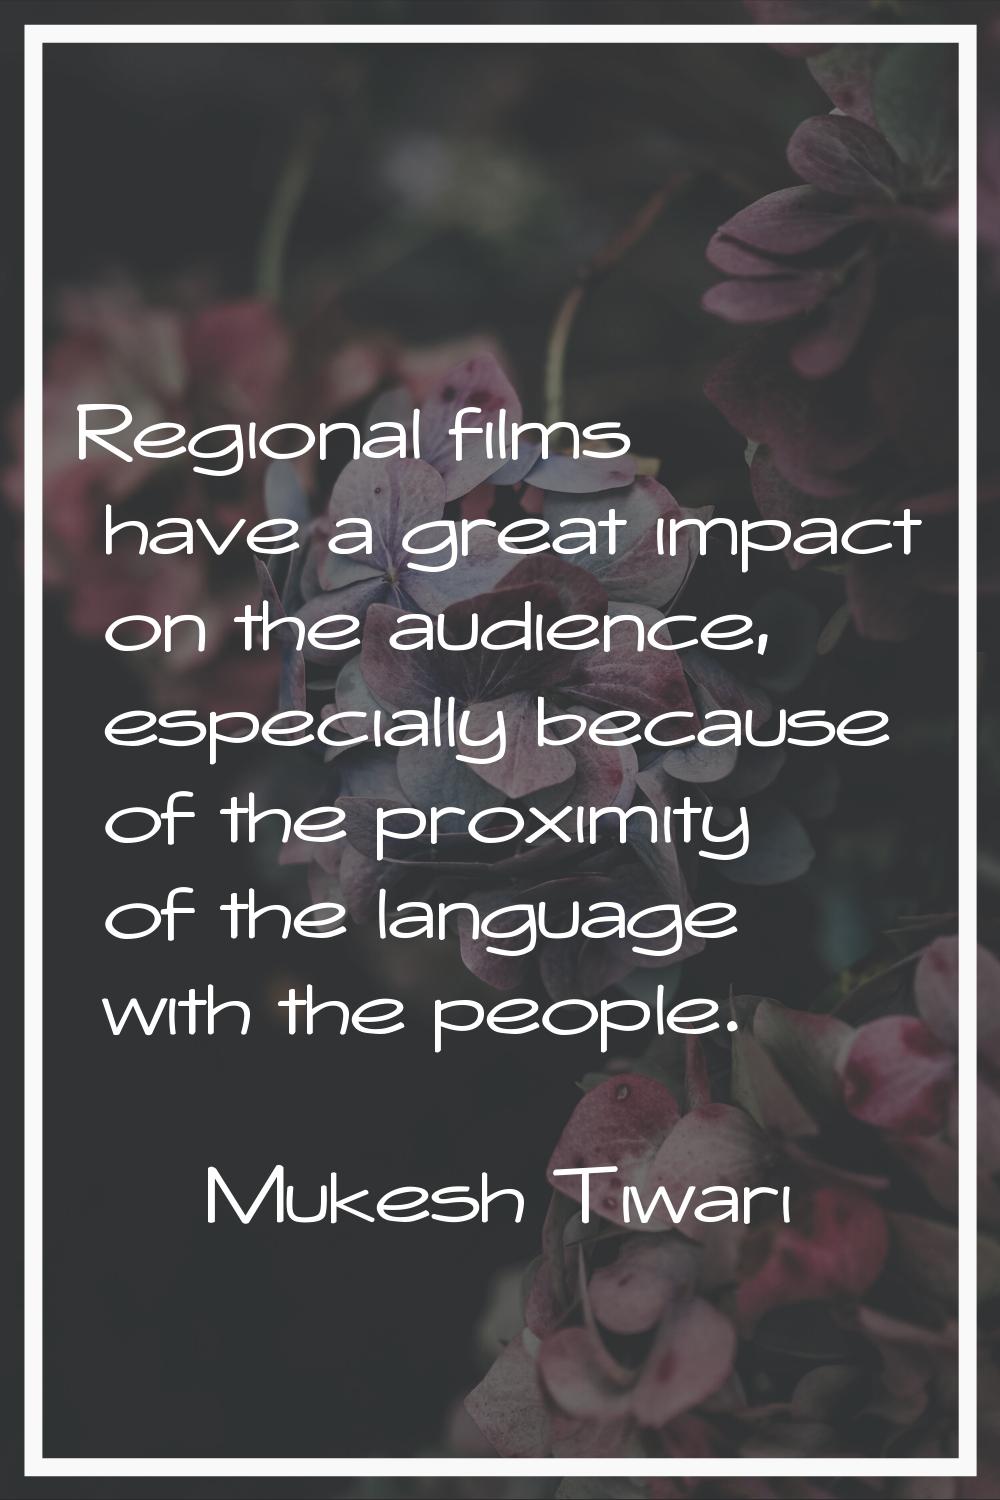 Regional films have a great impact on the audience, especially because of the proximity of the lang